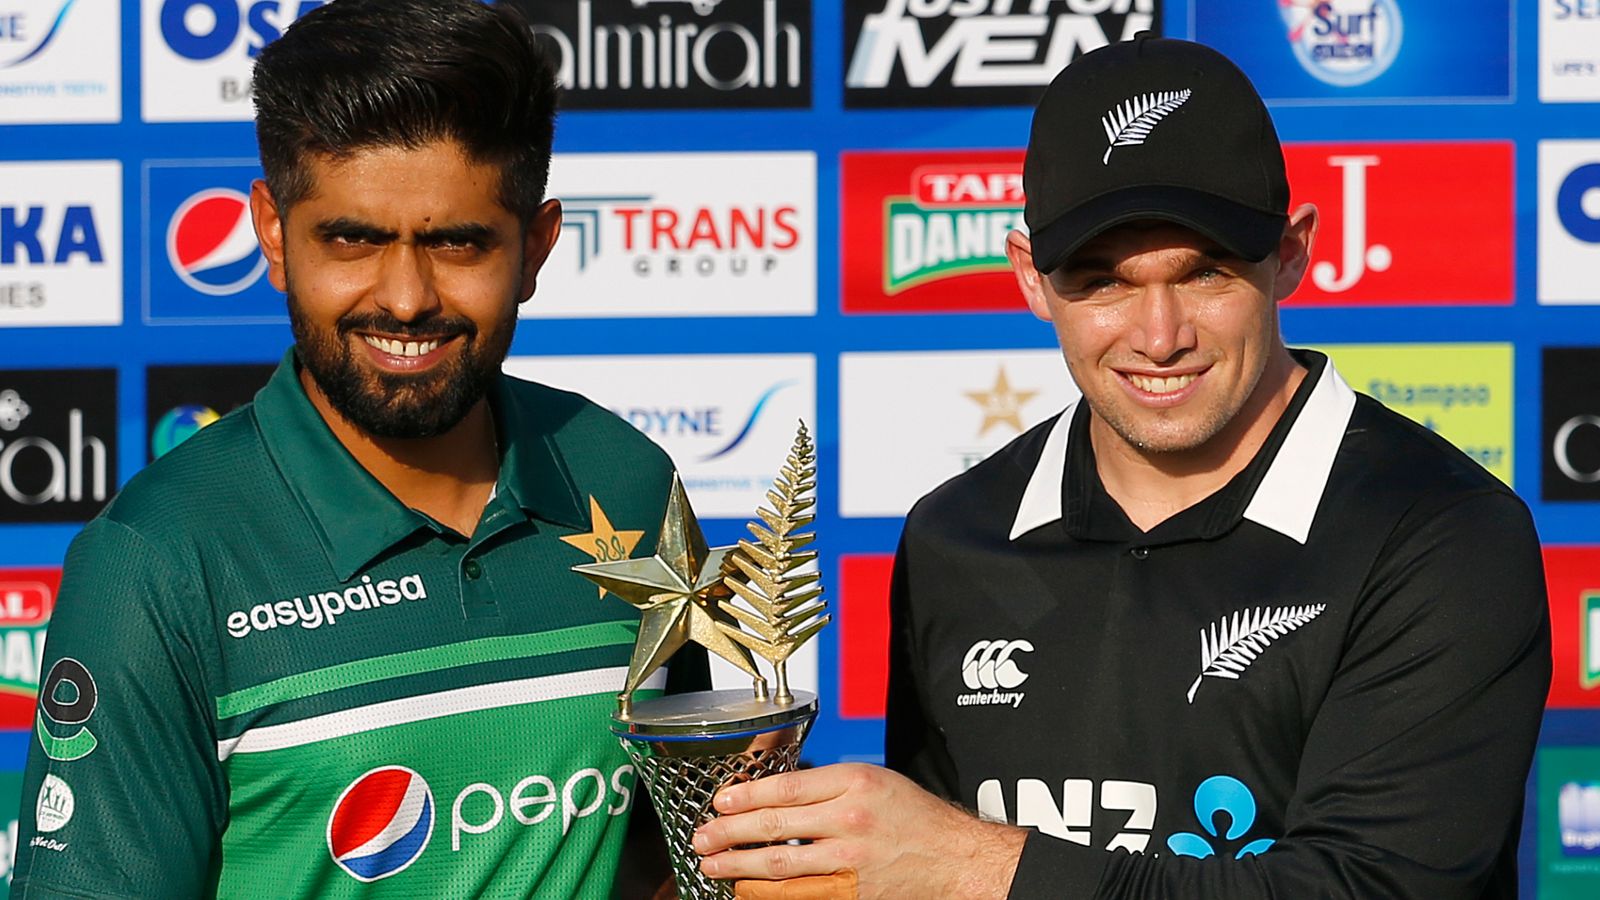 New Zealand reach Dubai after abandoning Pakistan tour over specific and credible security threat Cricket News Sky Sports